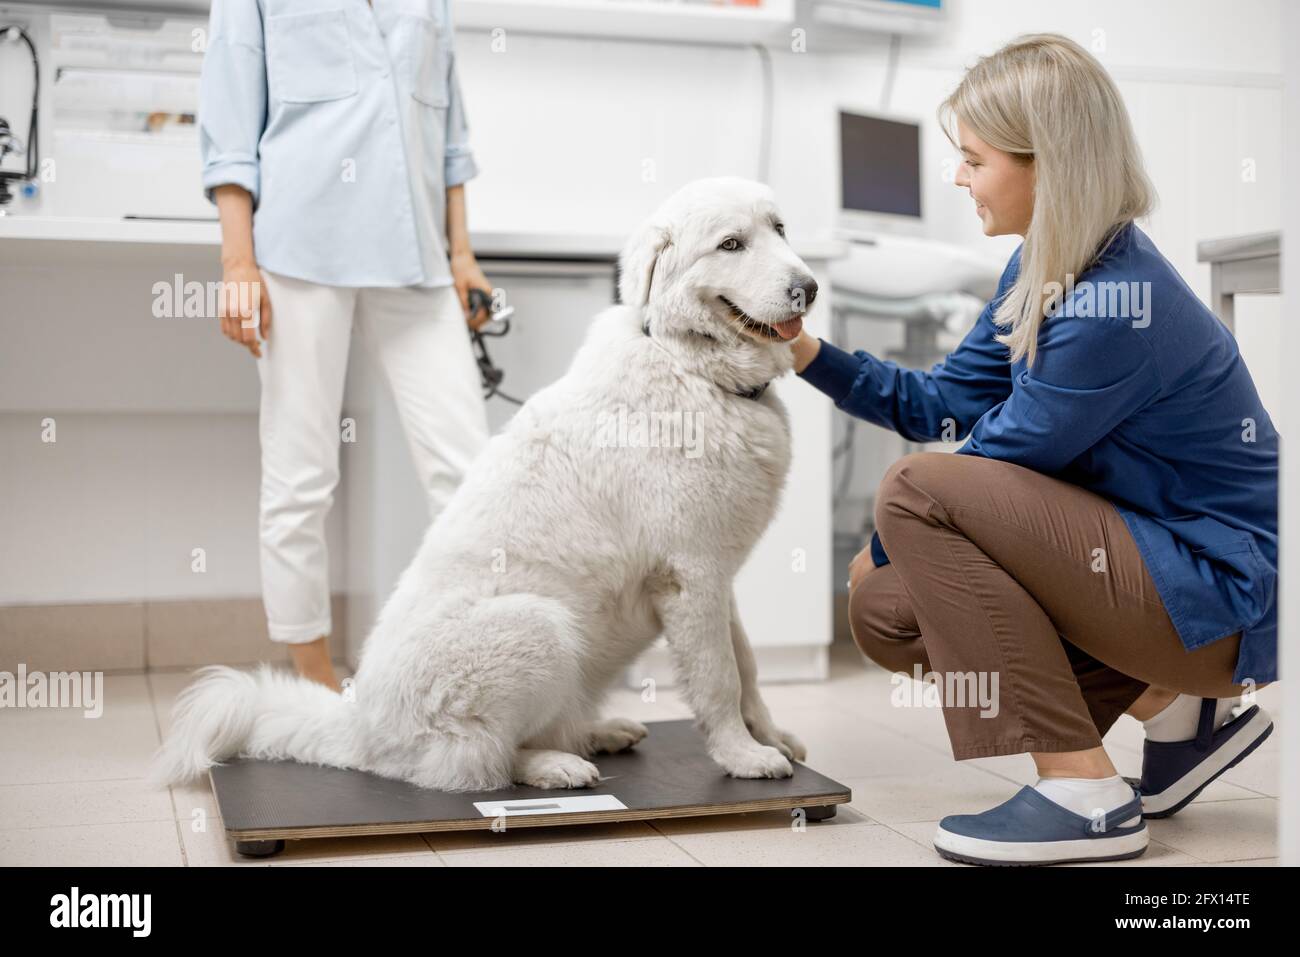 https://c8.alamy.com/comp/2FX14TE/big-happy-white-dog-sitting-on-the-veterinarian-scales-while-doctor-inspects-the-dog-and-owner-behind-the-dog-2FX14TE.jpg